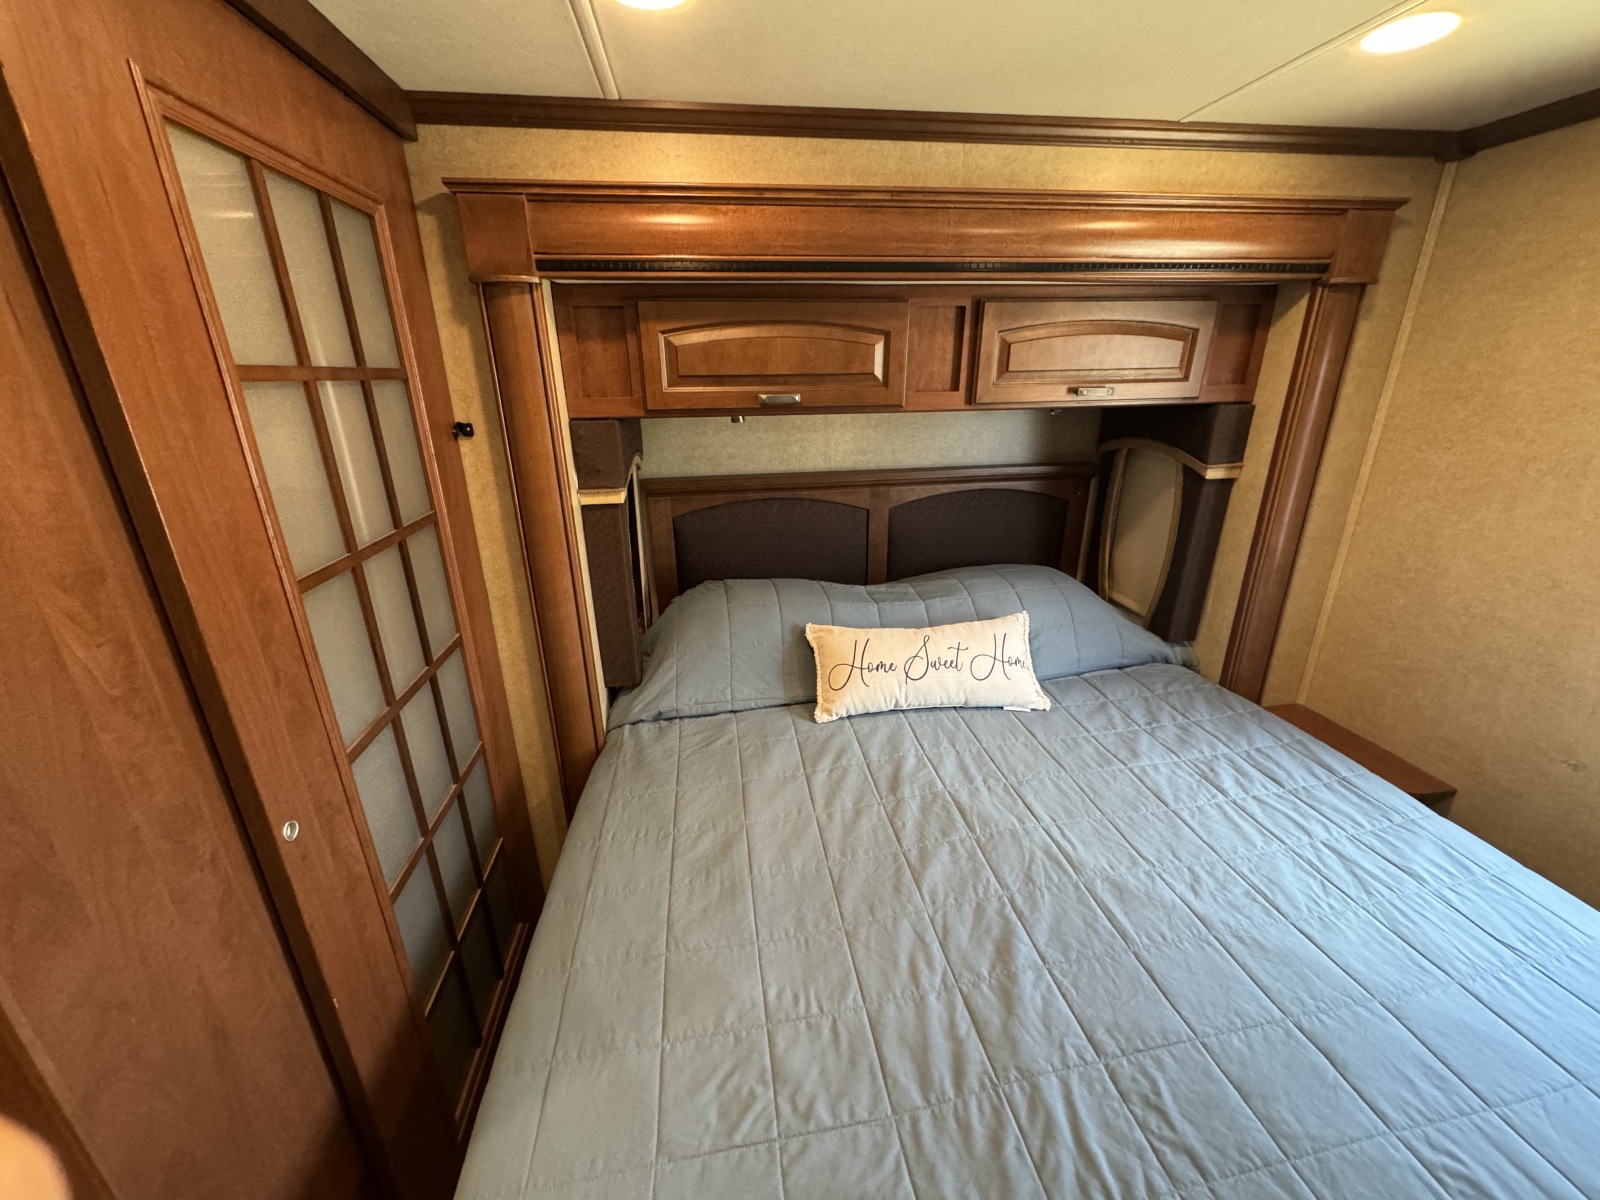 For Sale: 2015 Jayco Senaca 37 TS Frieghtliner Chassis - photo18